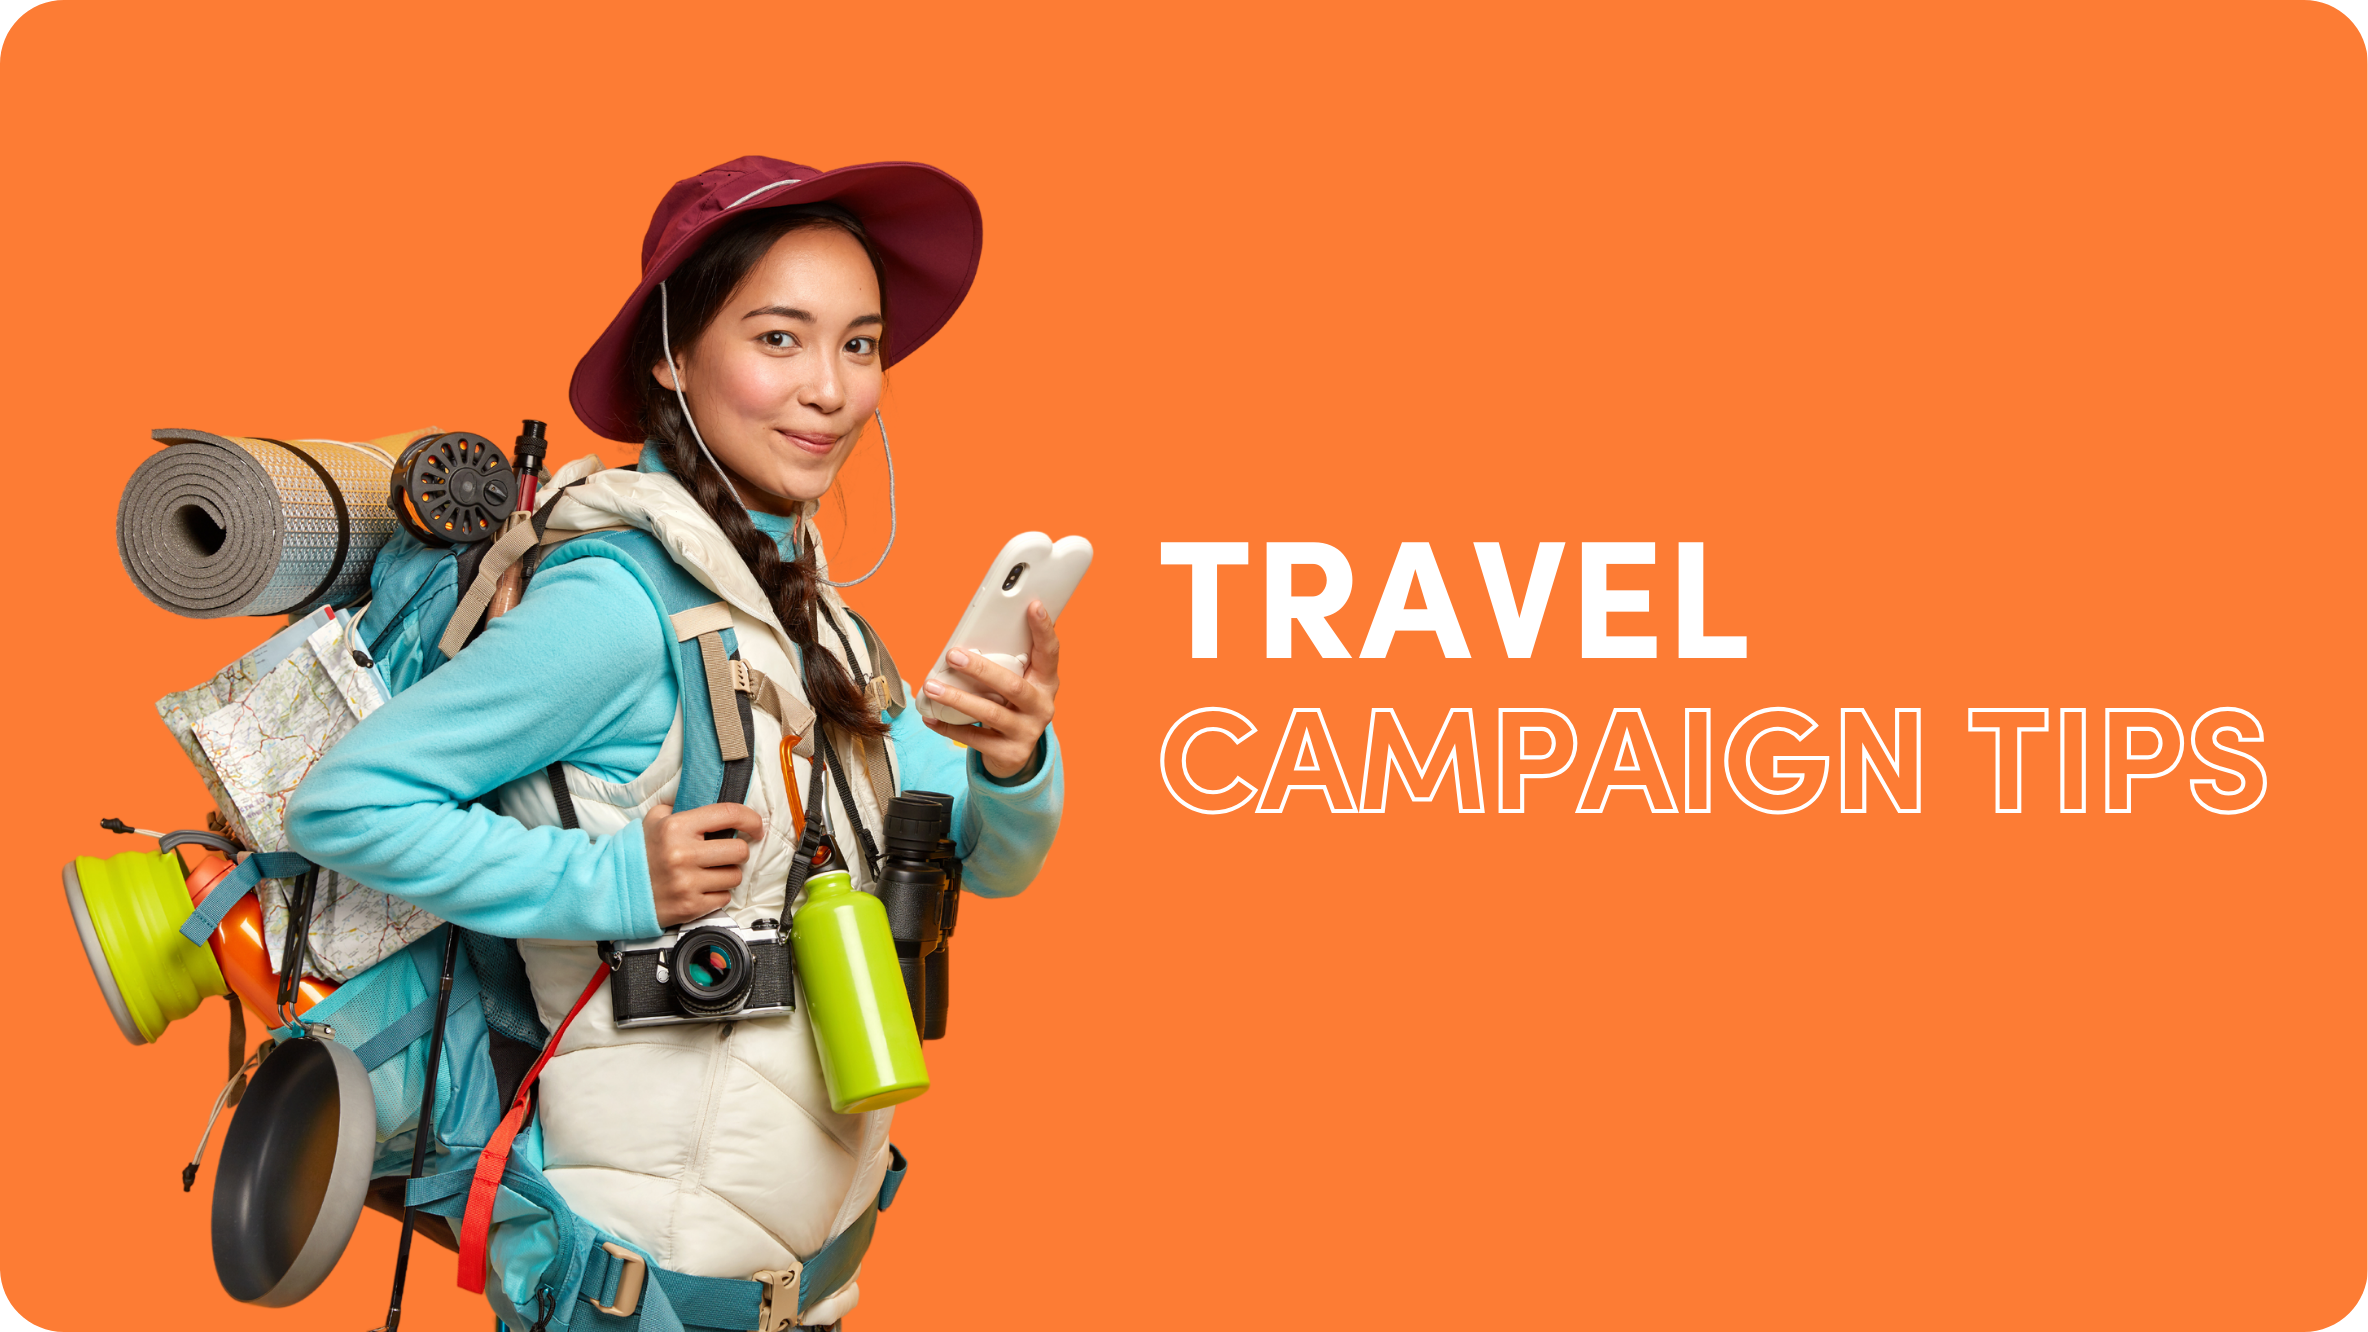 8 Tips to Make Your Travel Campaign Fly